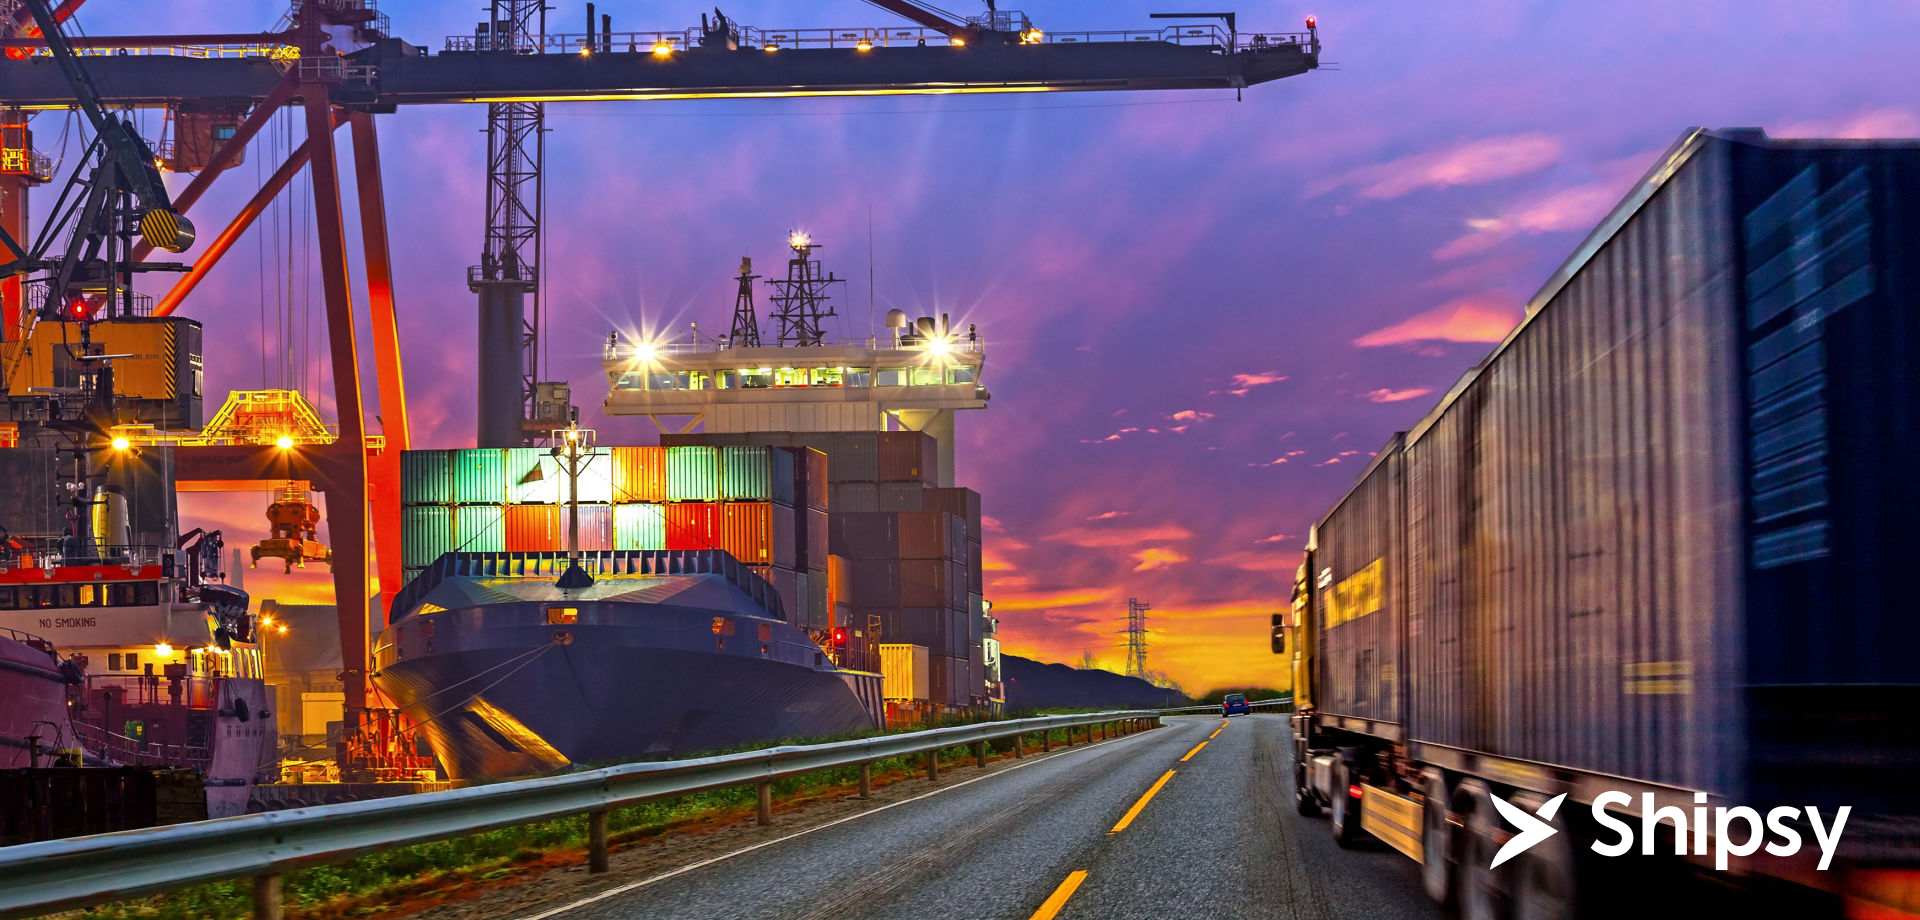 Global Freight Market: Key Trends and 2023 Outlook